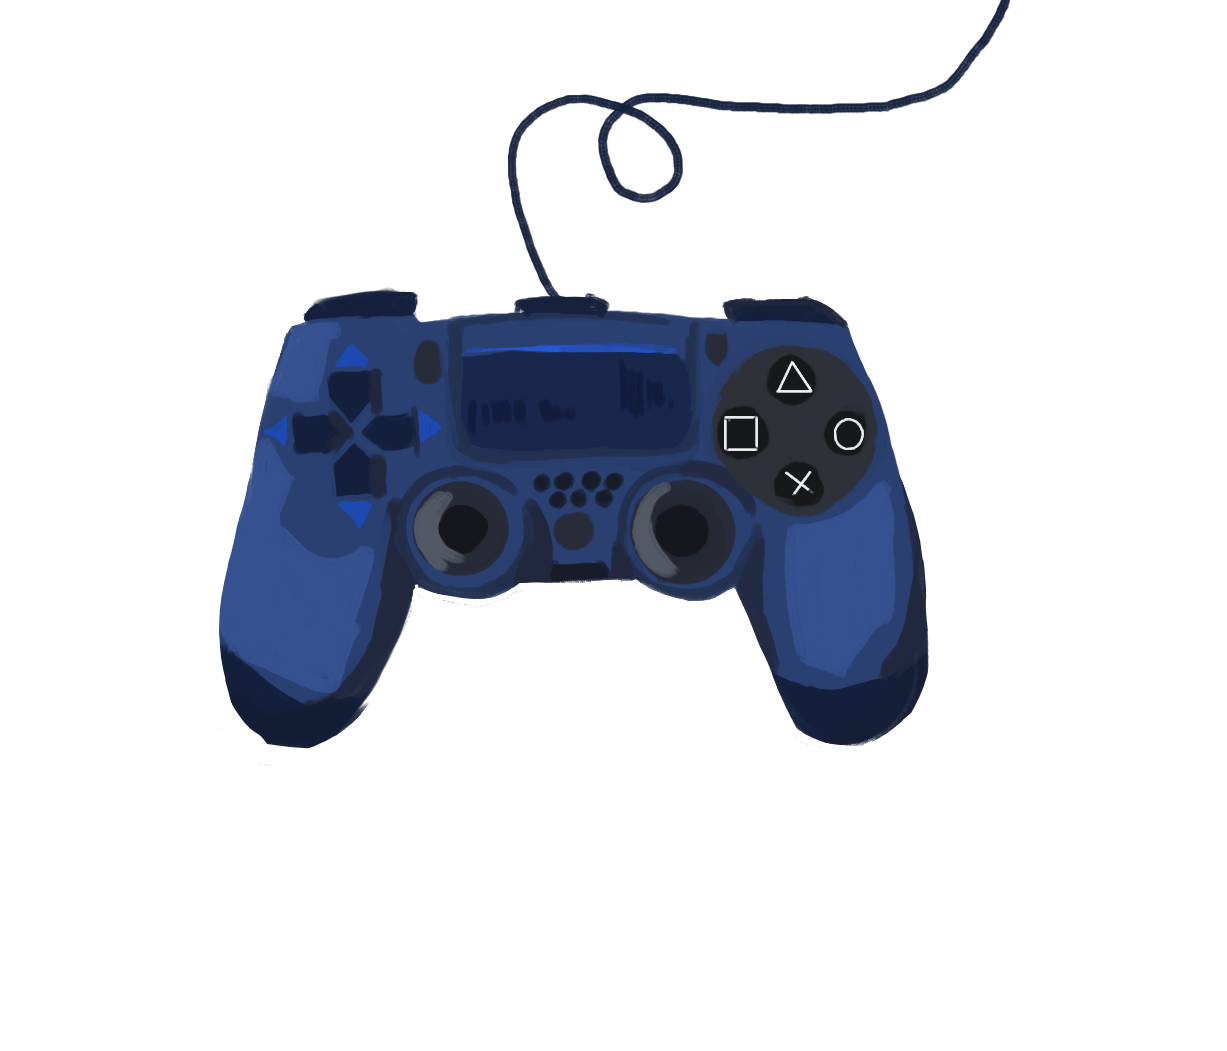 Blue playstation controller. Illustration by Markus Meneses